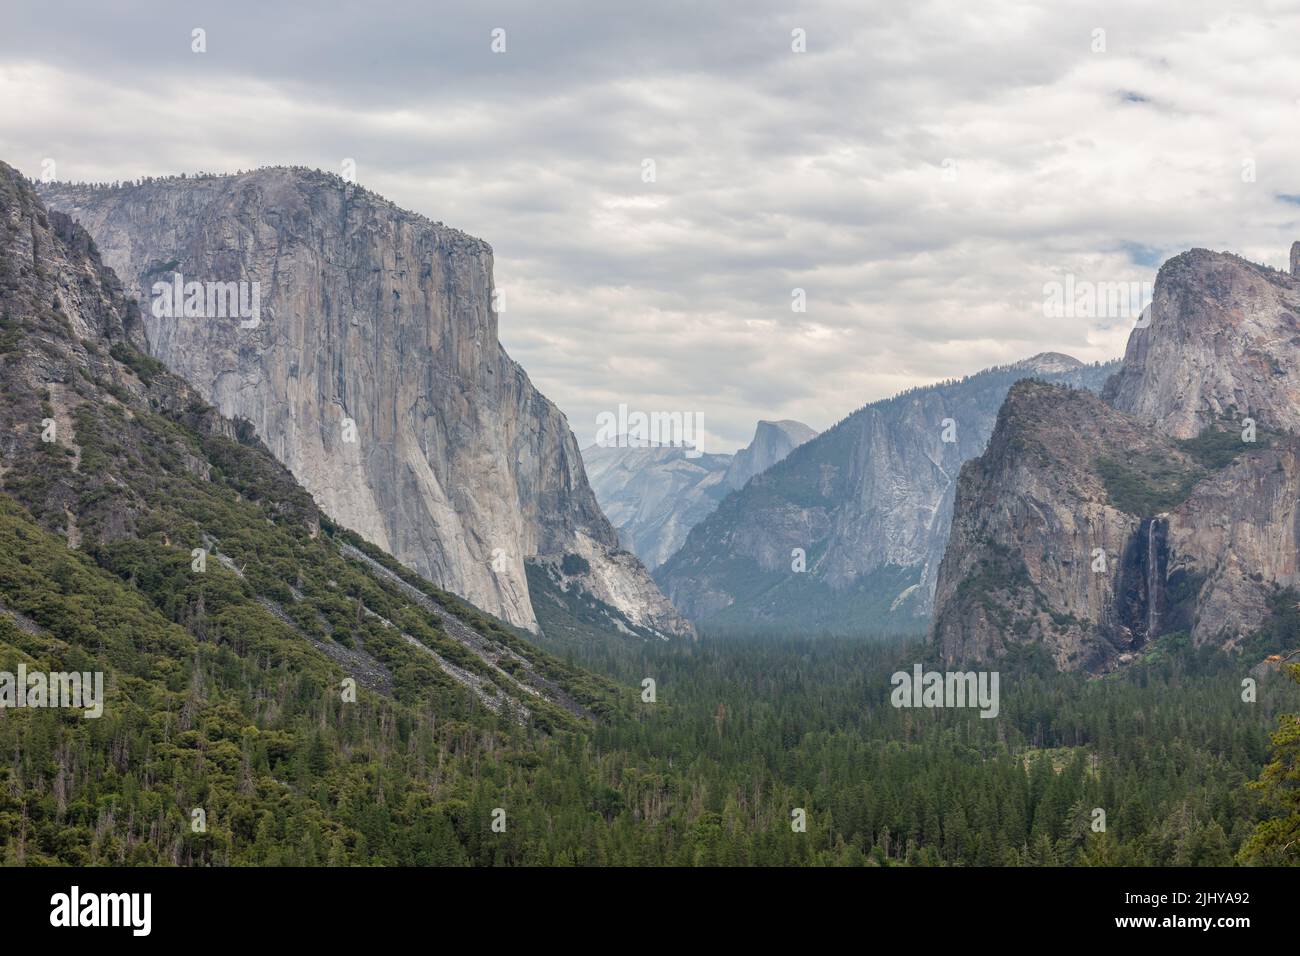 El Capitan, Half Dome, Bridal Veil Fall from tunnel View, Yosemite National Park, Californie Banque D'Images